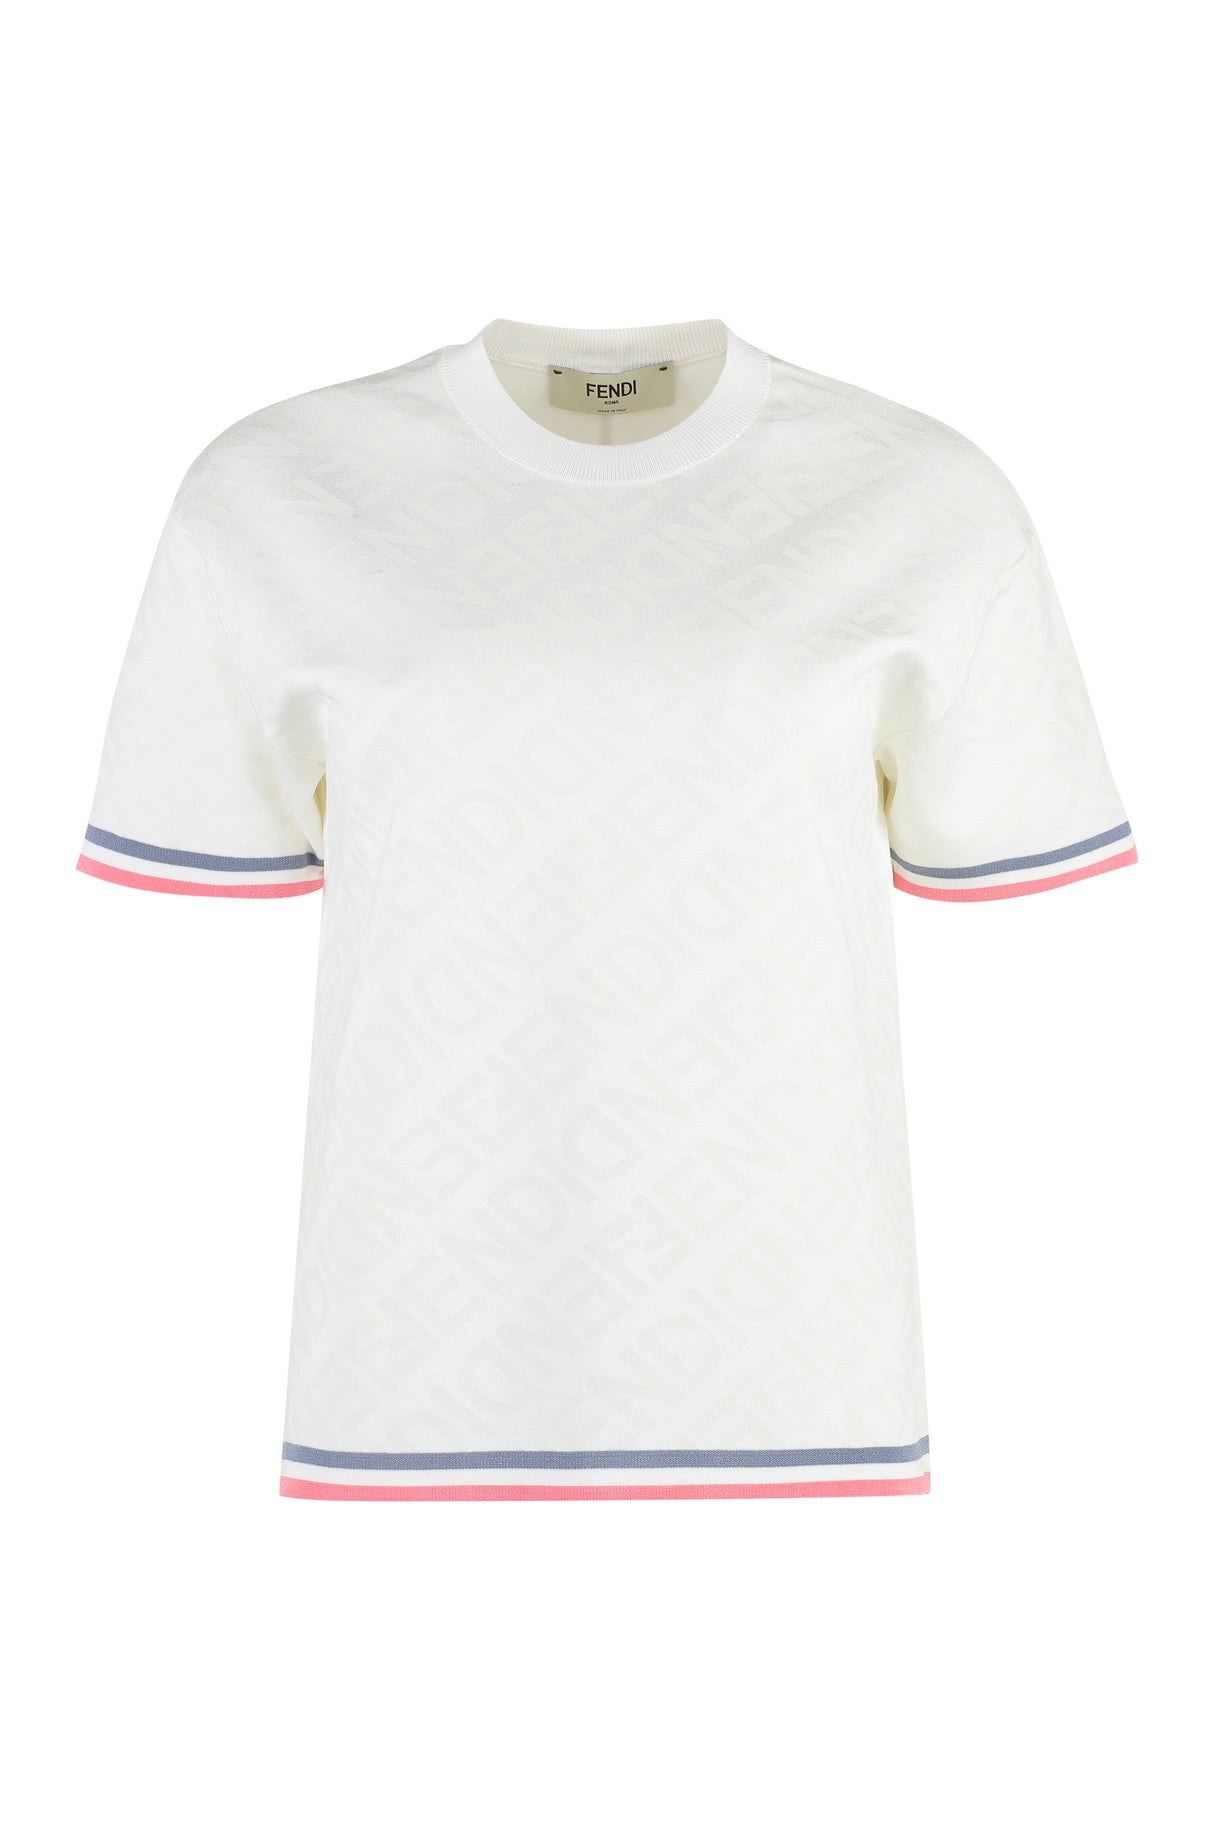 White Cotton Fendi Sweater for Women - SS23 Collection